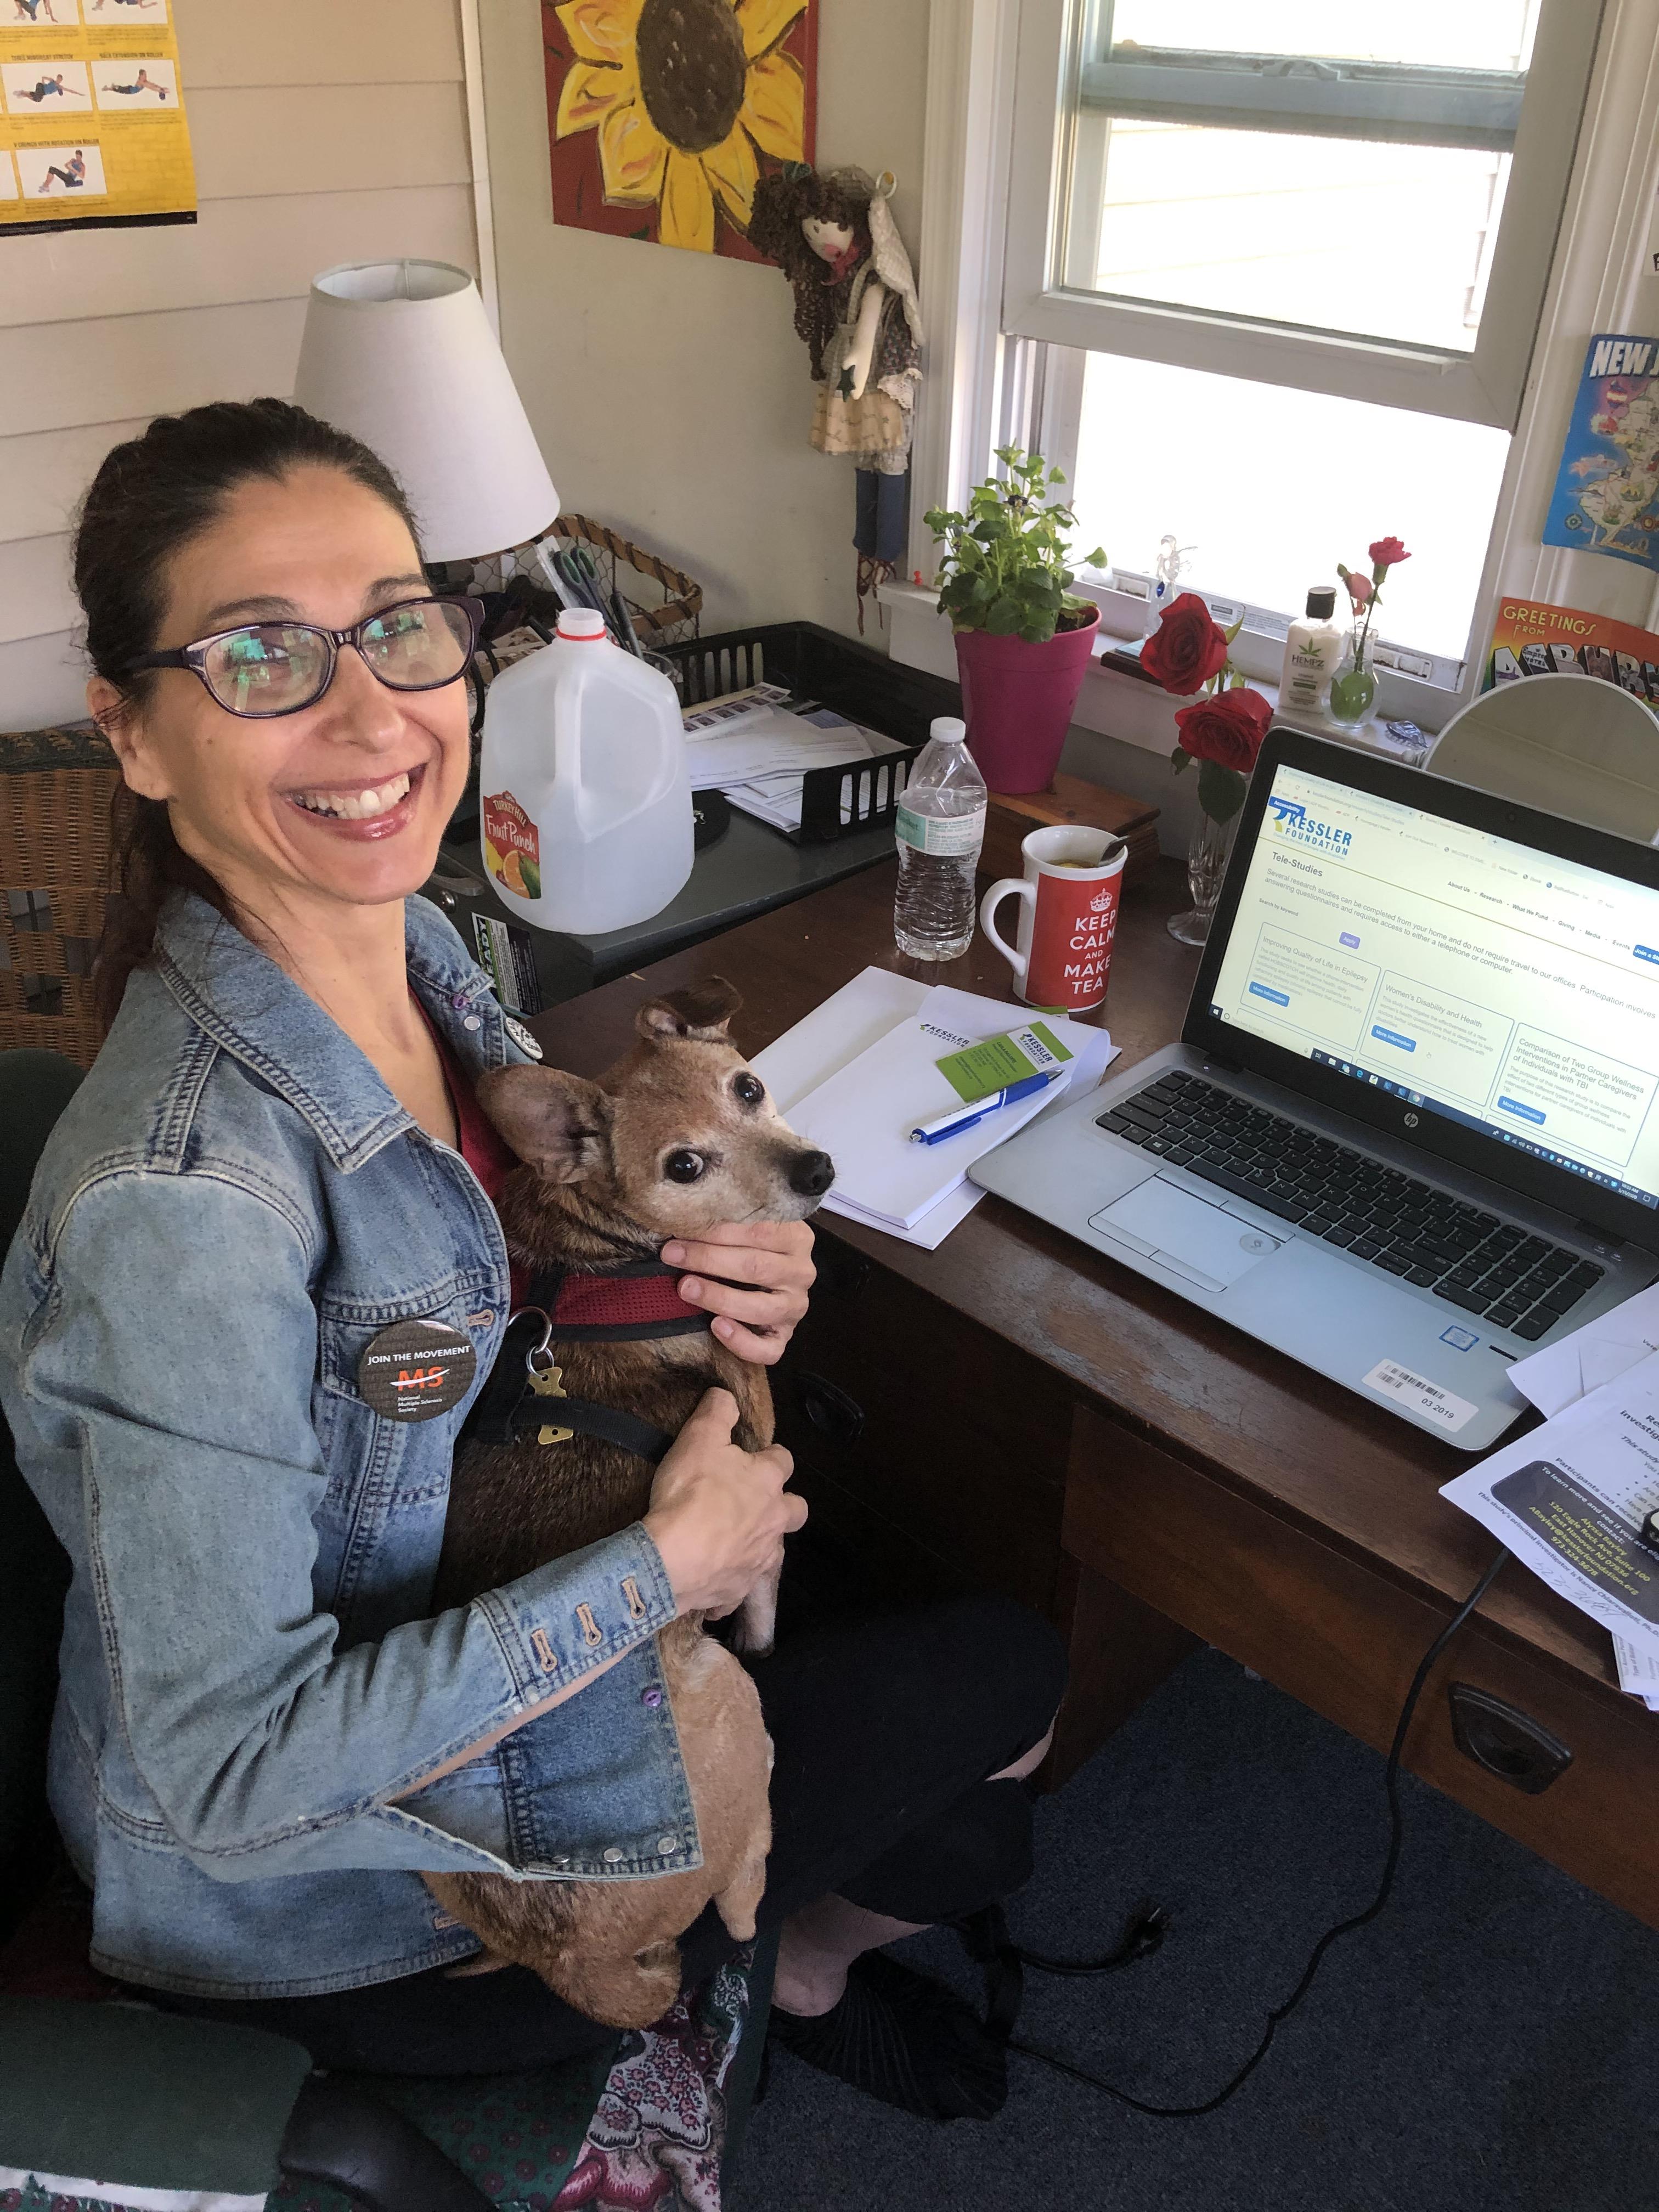 Carla Basante holding her dog, smiling at the camera, and working from home 